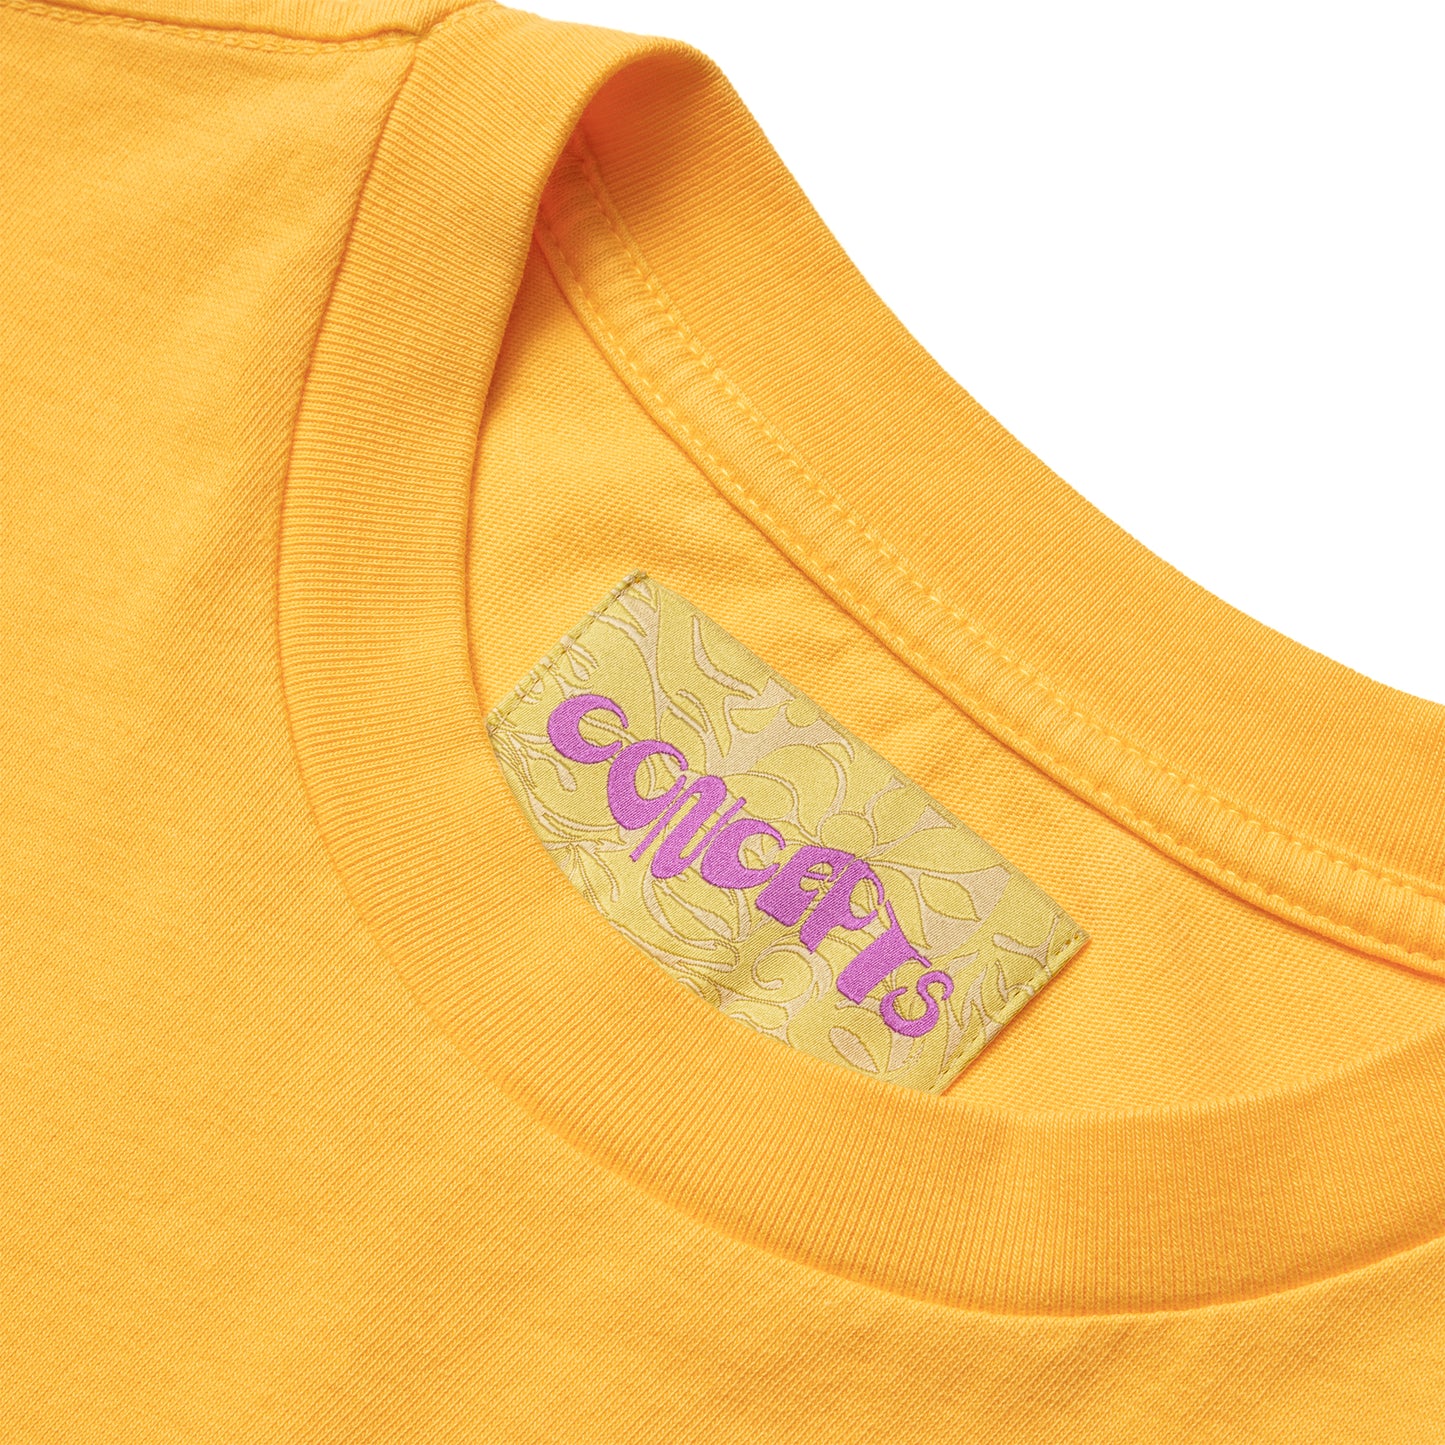 Concepts Patch Tee (Sunshine Yellow)